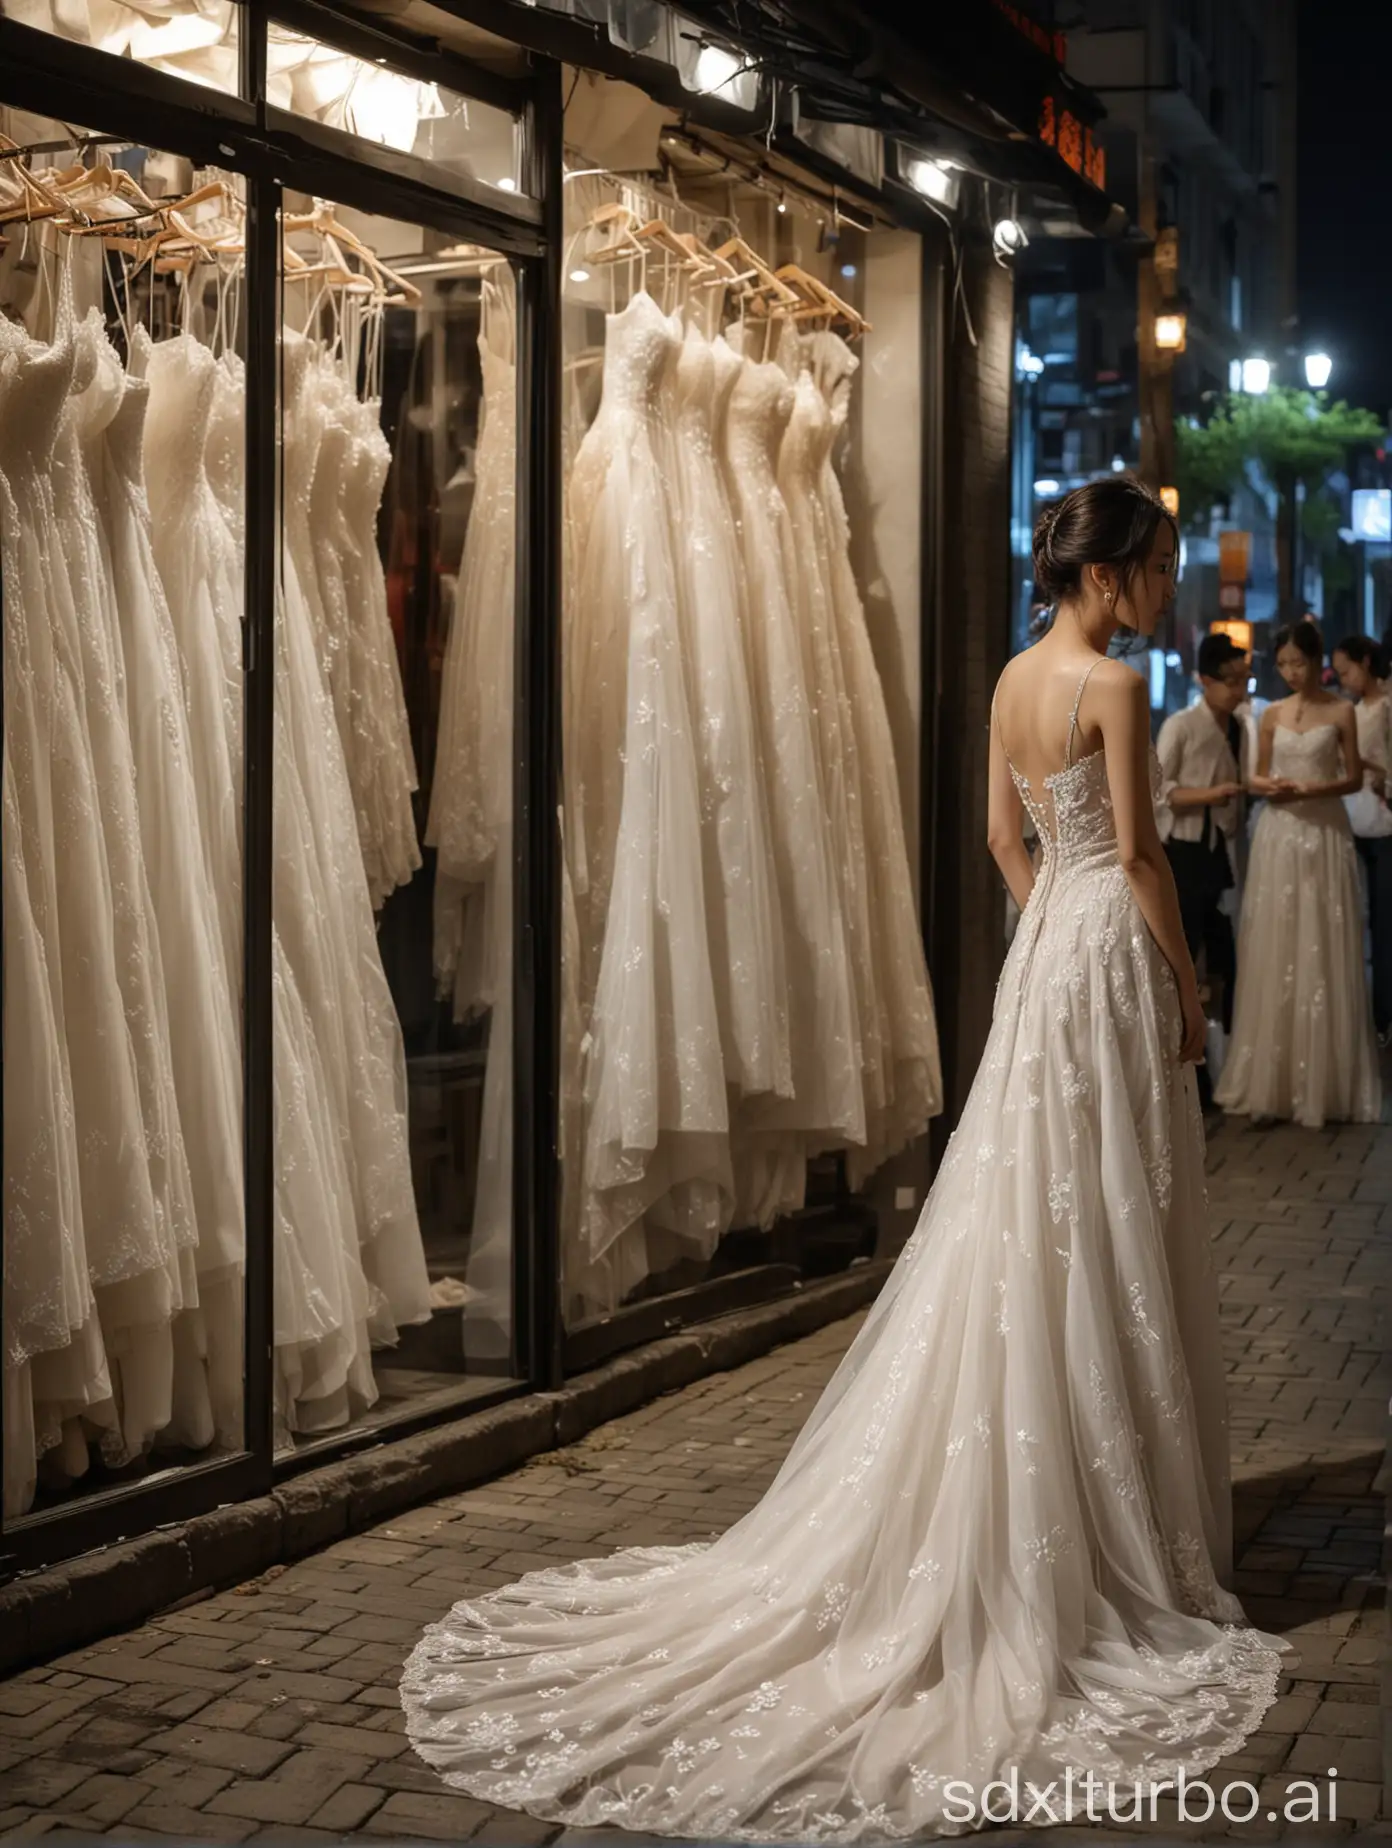 At night, a Chinese girl is looking at the wedding dresses in the bridal shop on the city street alone